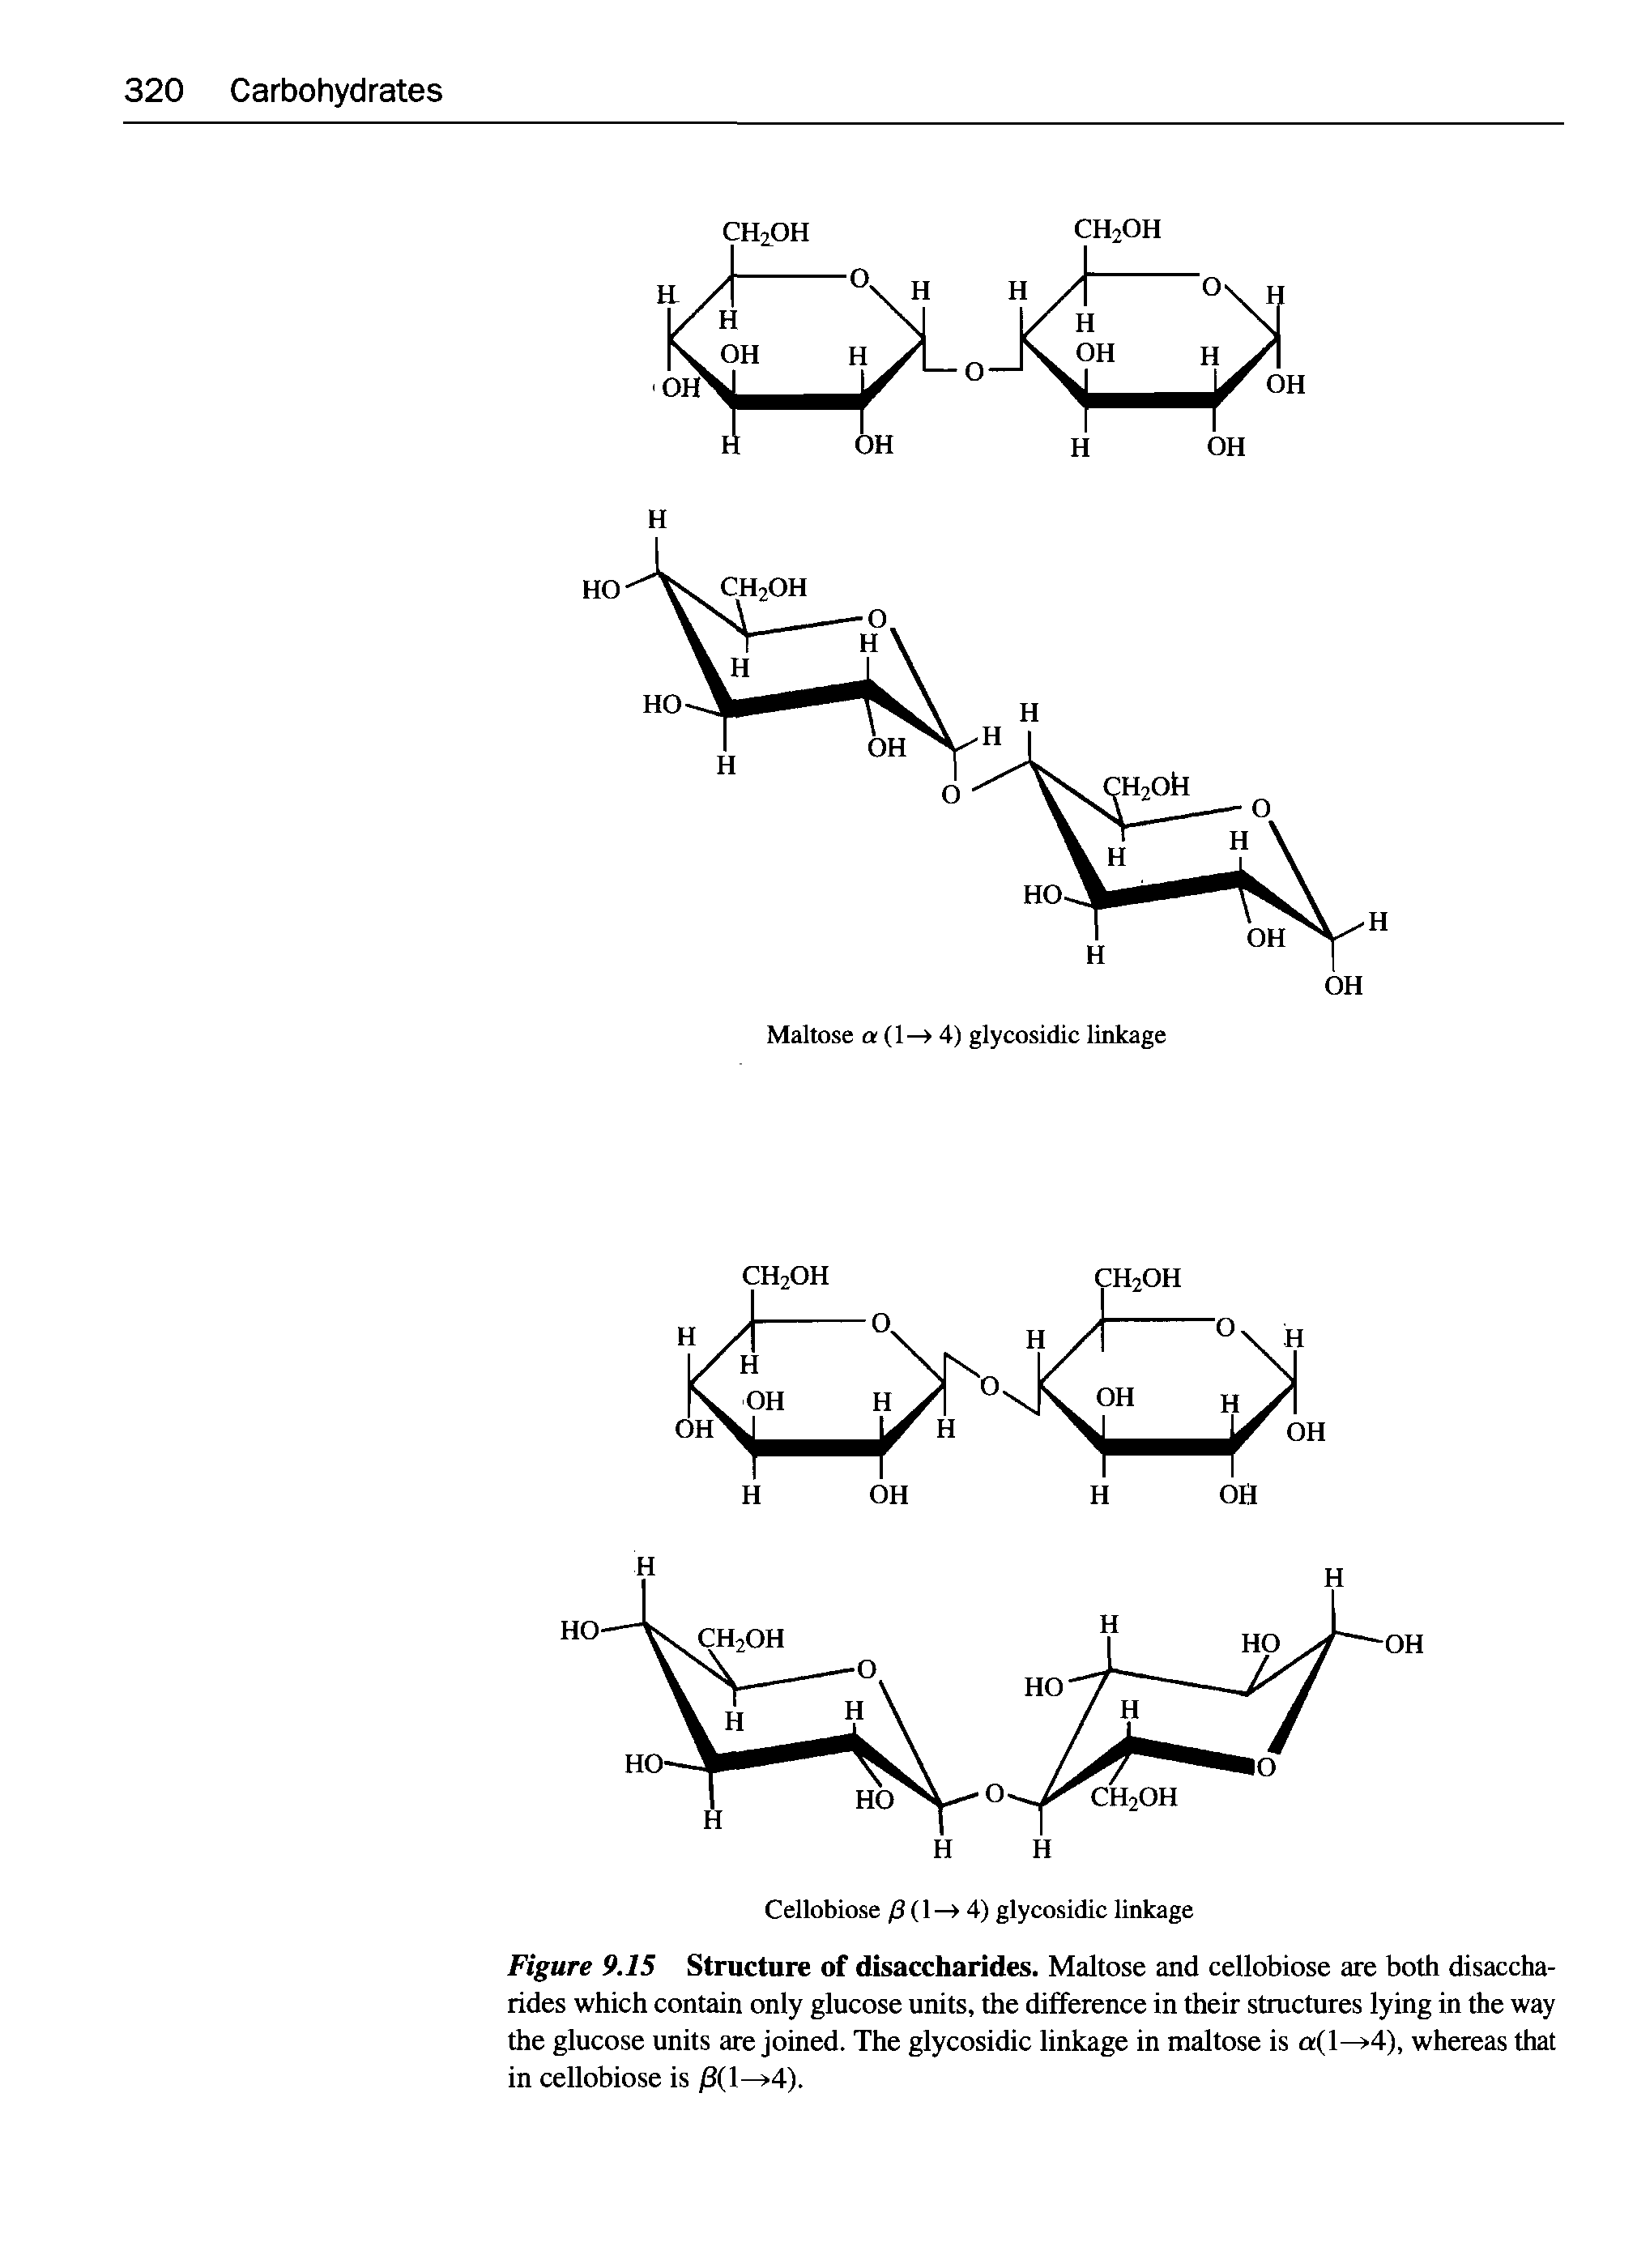 Figure 9.15 Structure of disaccharides. Maltose and cellobiose are both disaccharides which contain only glucose units, the difference in their structures lying in the way the glucose units are joined. The glycosidic linkage in maltose is afl—>4), whereas that in cellobiose is (1—>4).